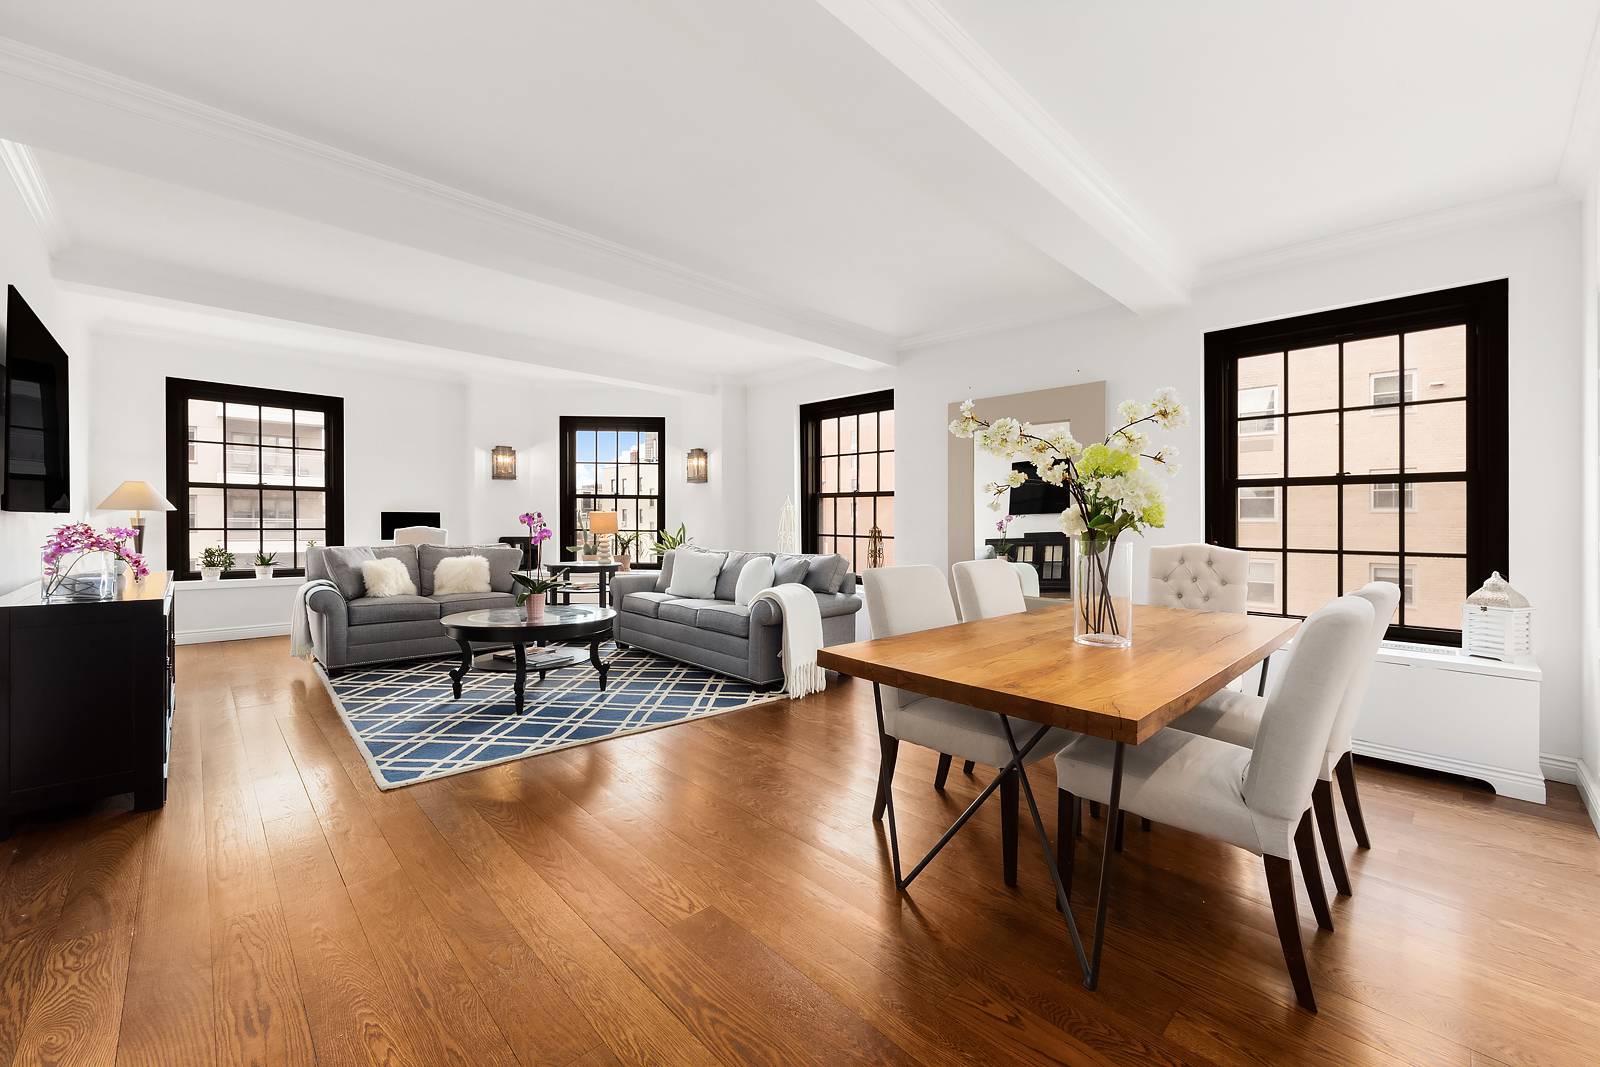 Rare Prewar Renovated Large Two Bedroom Gem at the Iconic amp ; Prestigious One Fifth Avenue Pied a Terres Welcome This rare large renovated prewar two bed two bath apartment ...